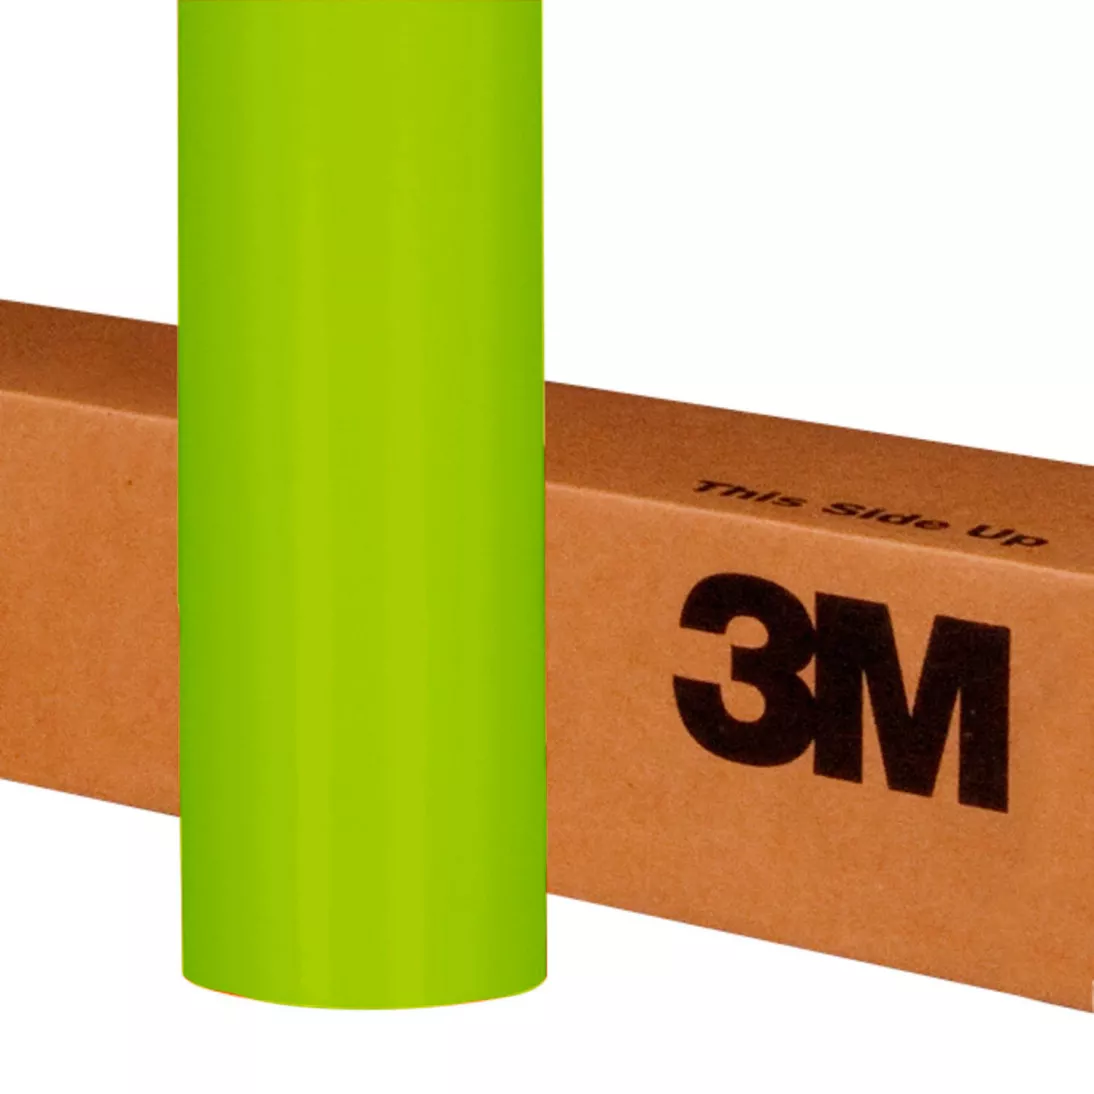 3M™ Scotchcal™ ElectroCut™ Graphic Film 7725-136, Lime Green, 48 in x 50
yd